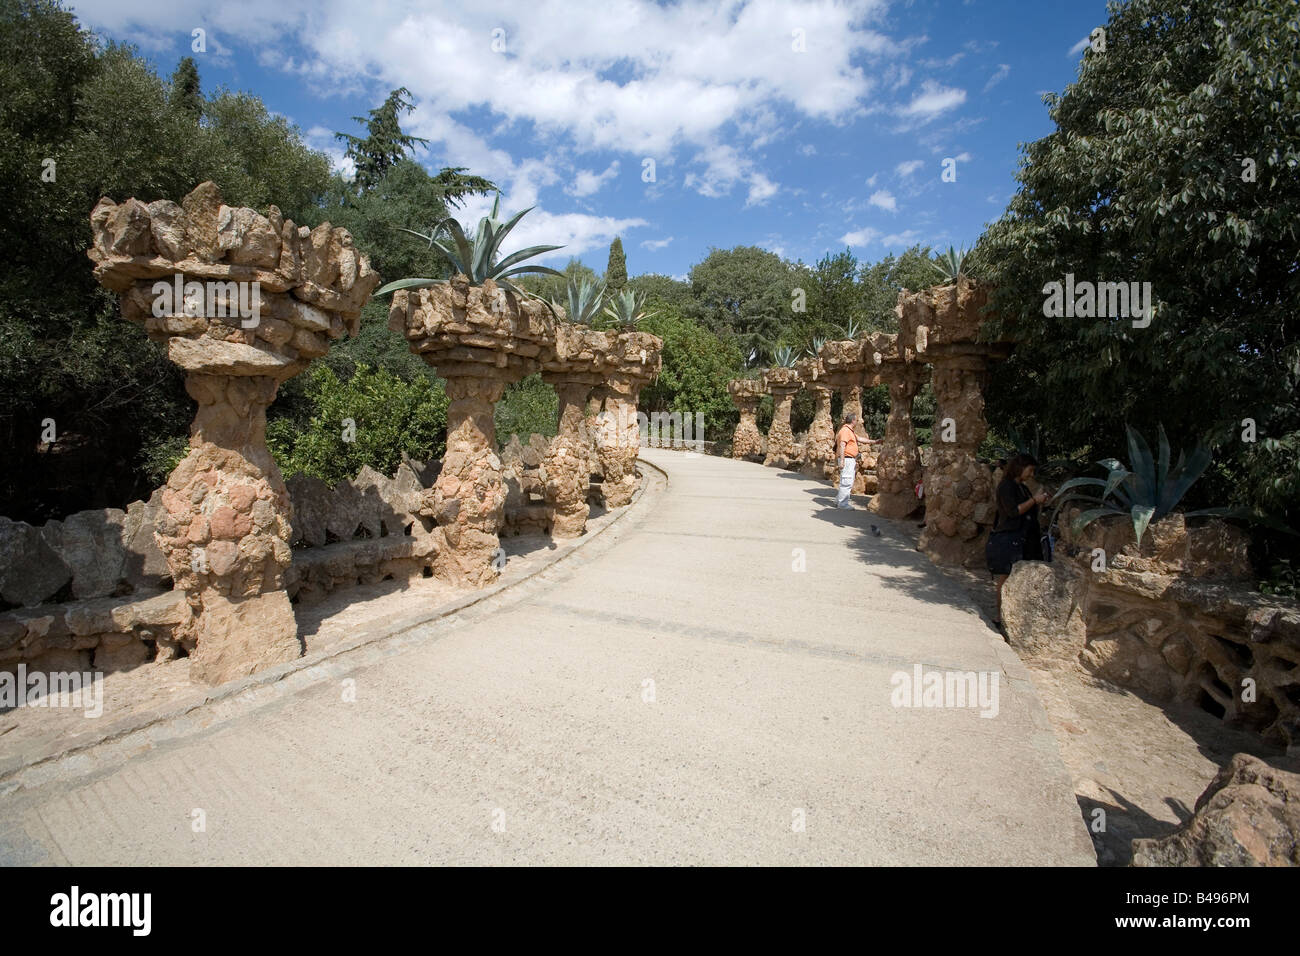 Parque Guell Barcelona Spain Stock Photo